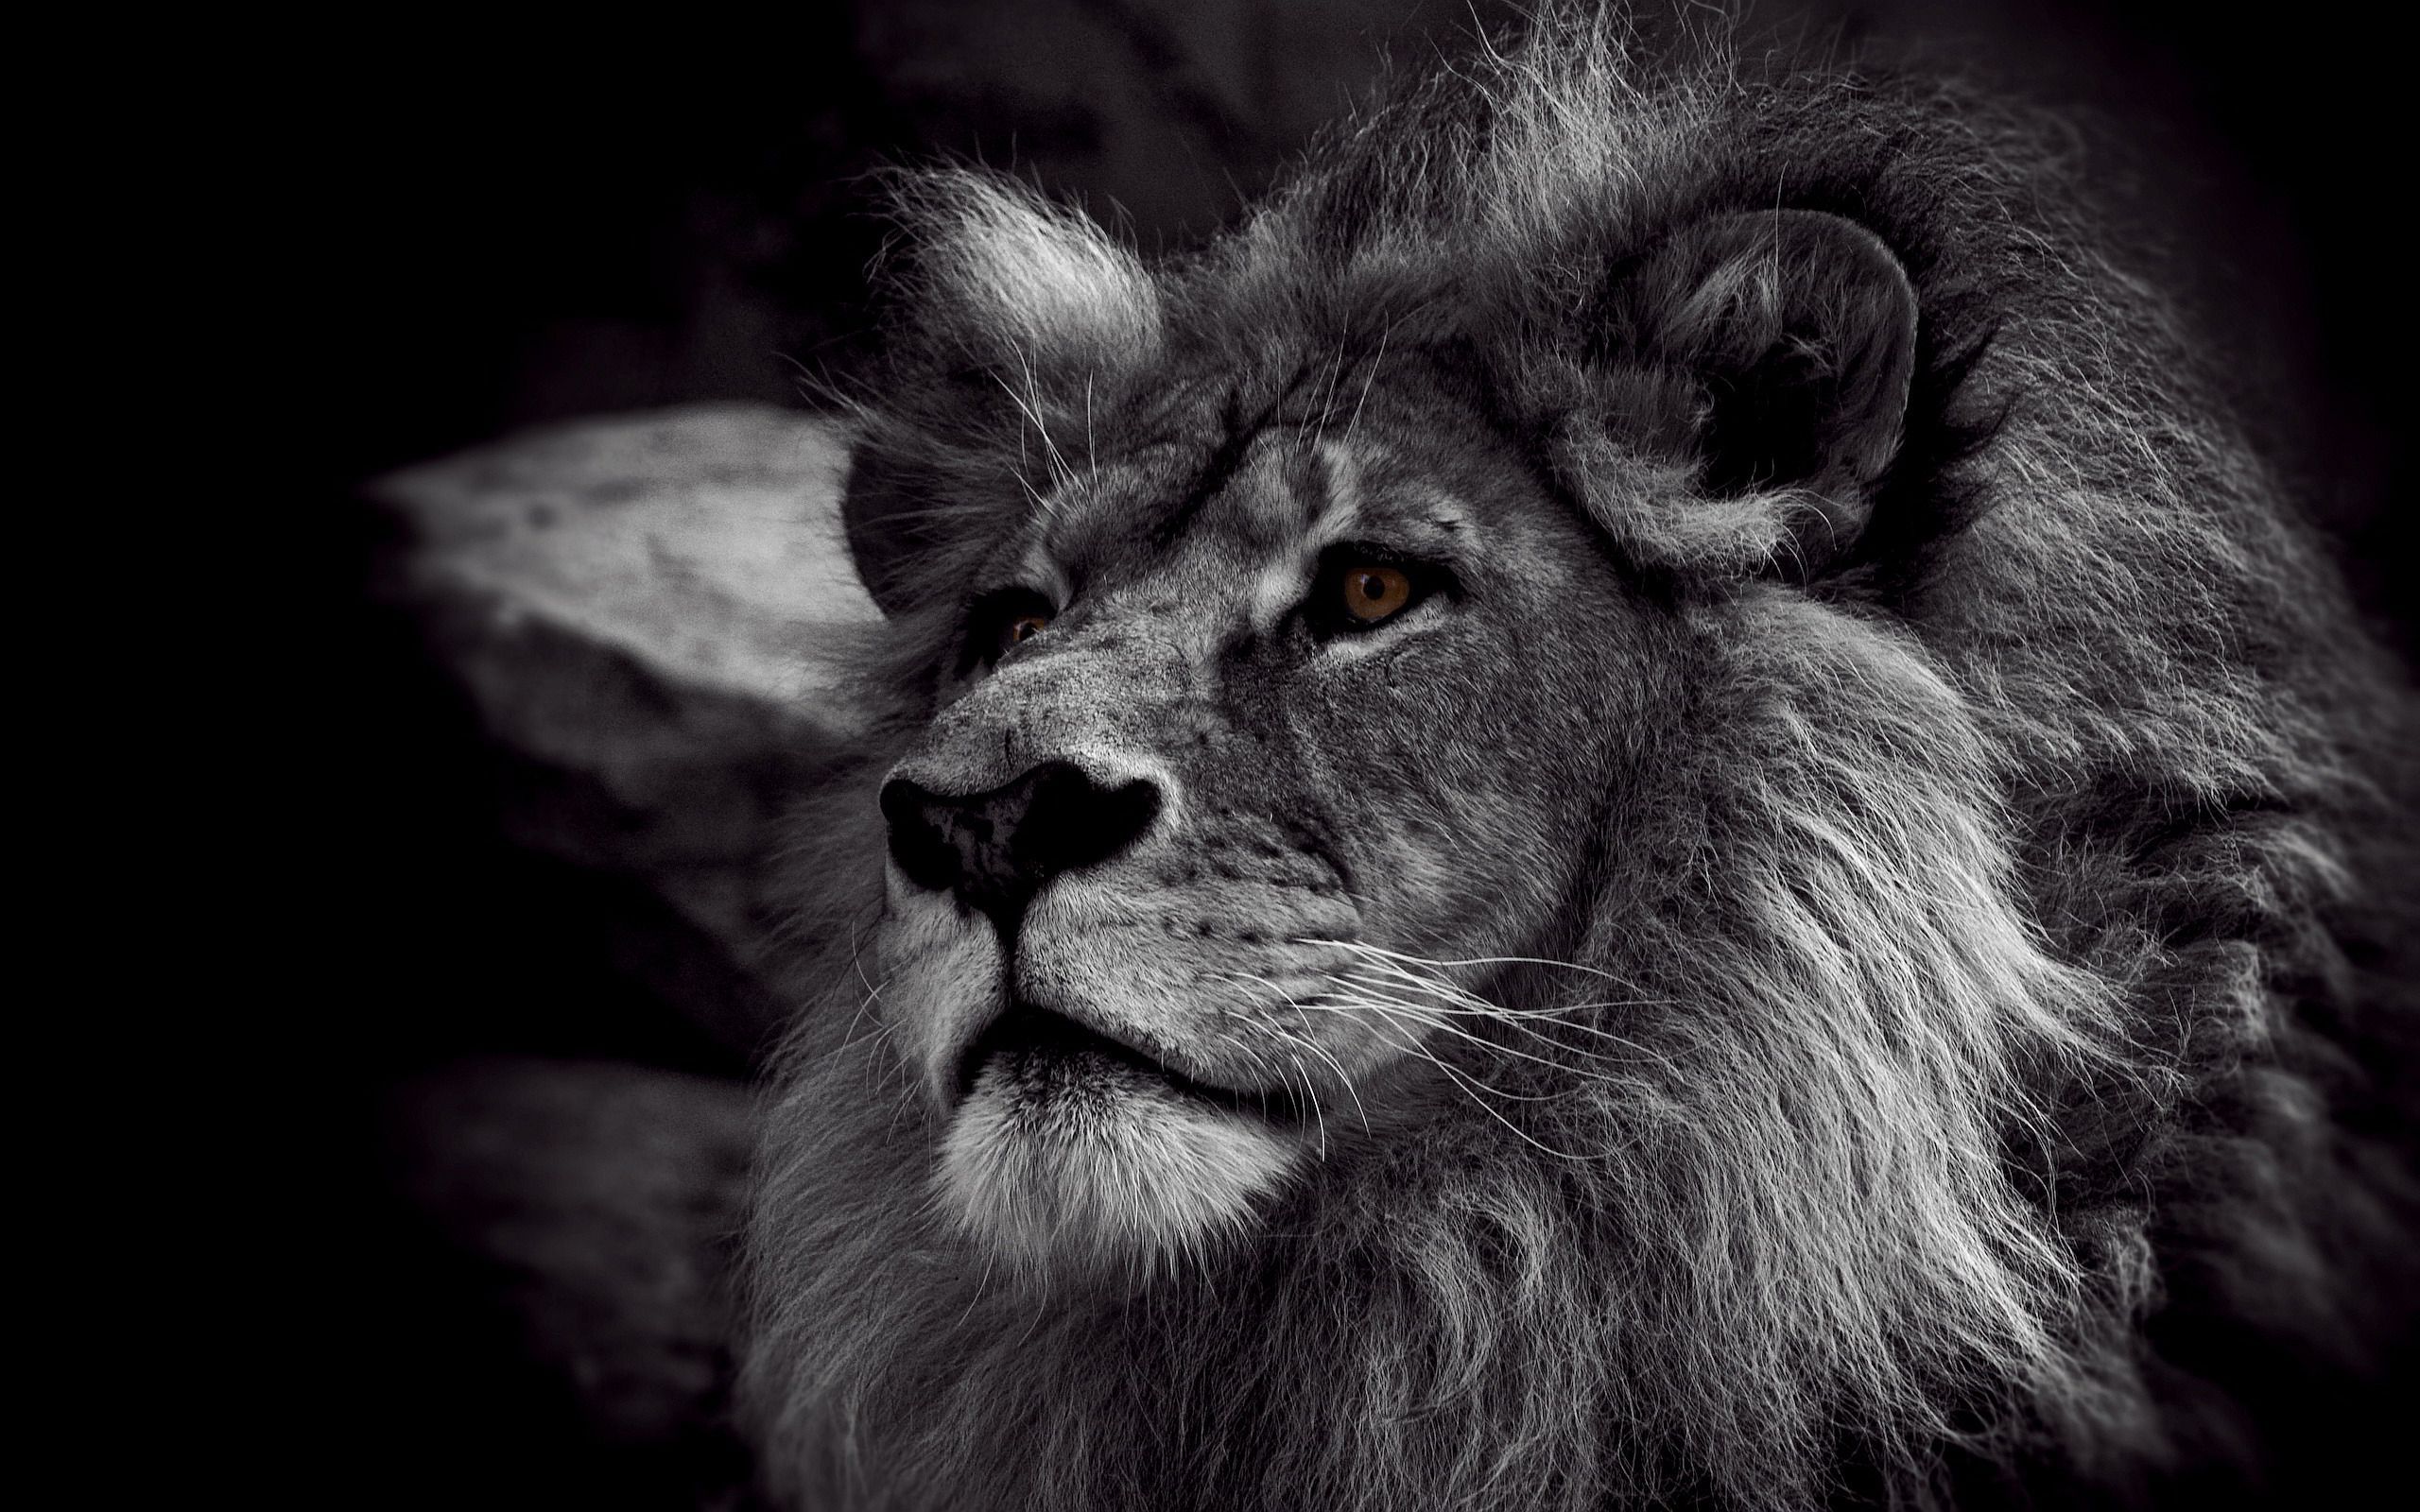 Lion Black and White Best Quality Wallpapers 2062 - HD Wallpaper Site